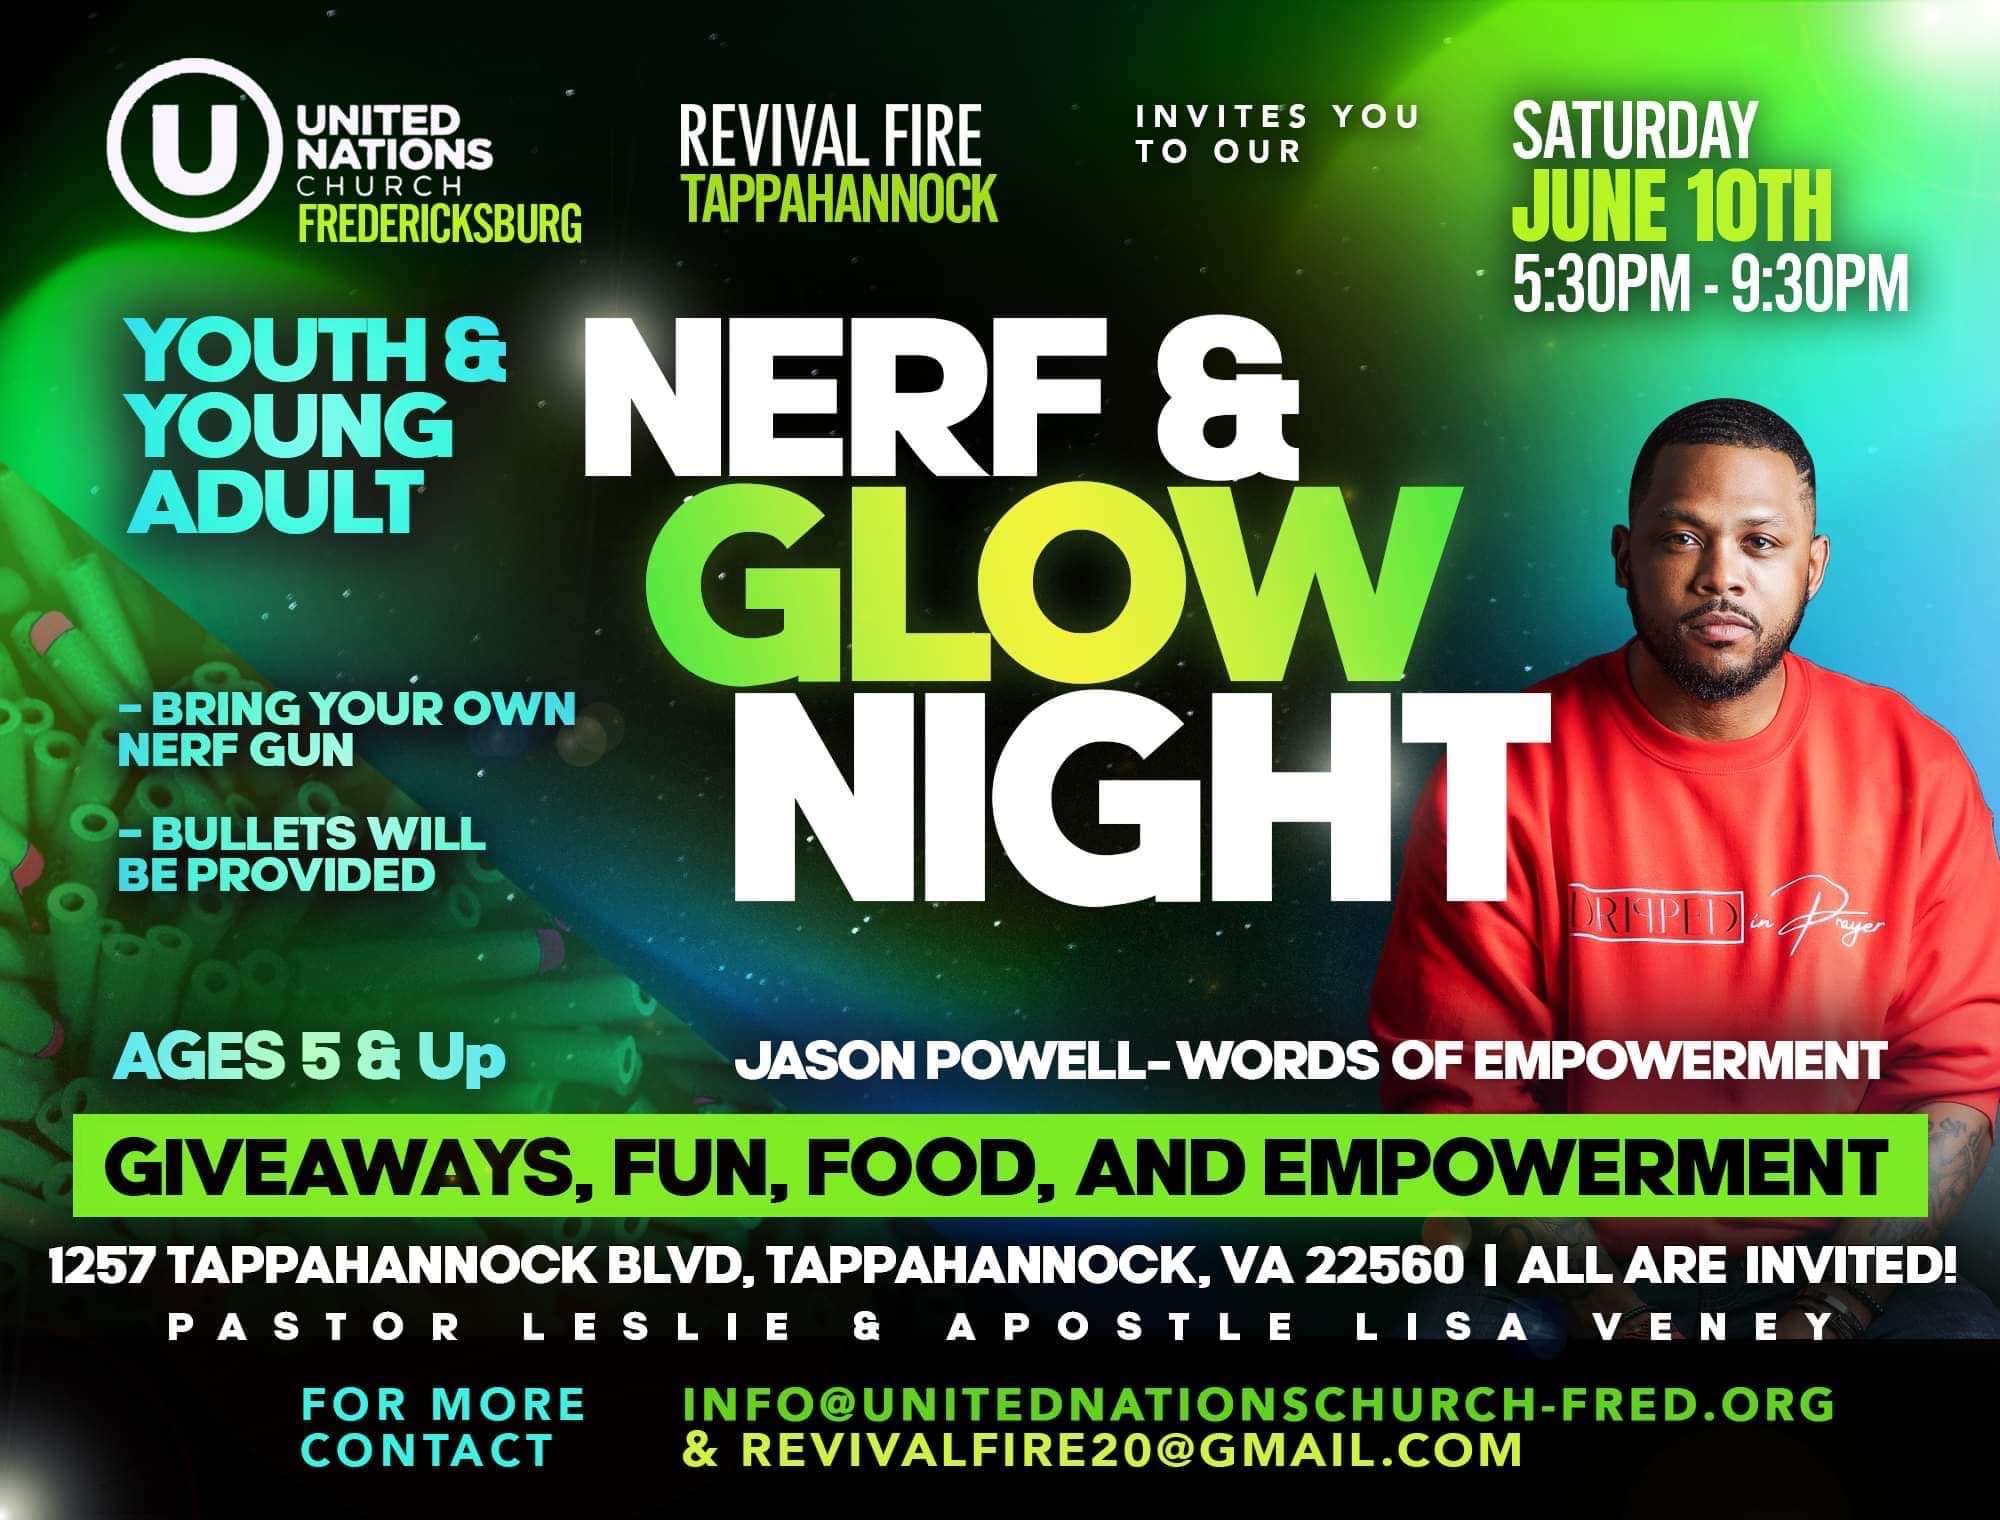 <h1 class="tribe-events-single-event-title">NERF & GLOW NIGHT</h1>